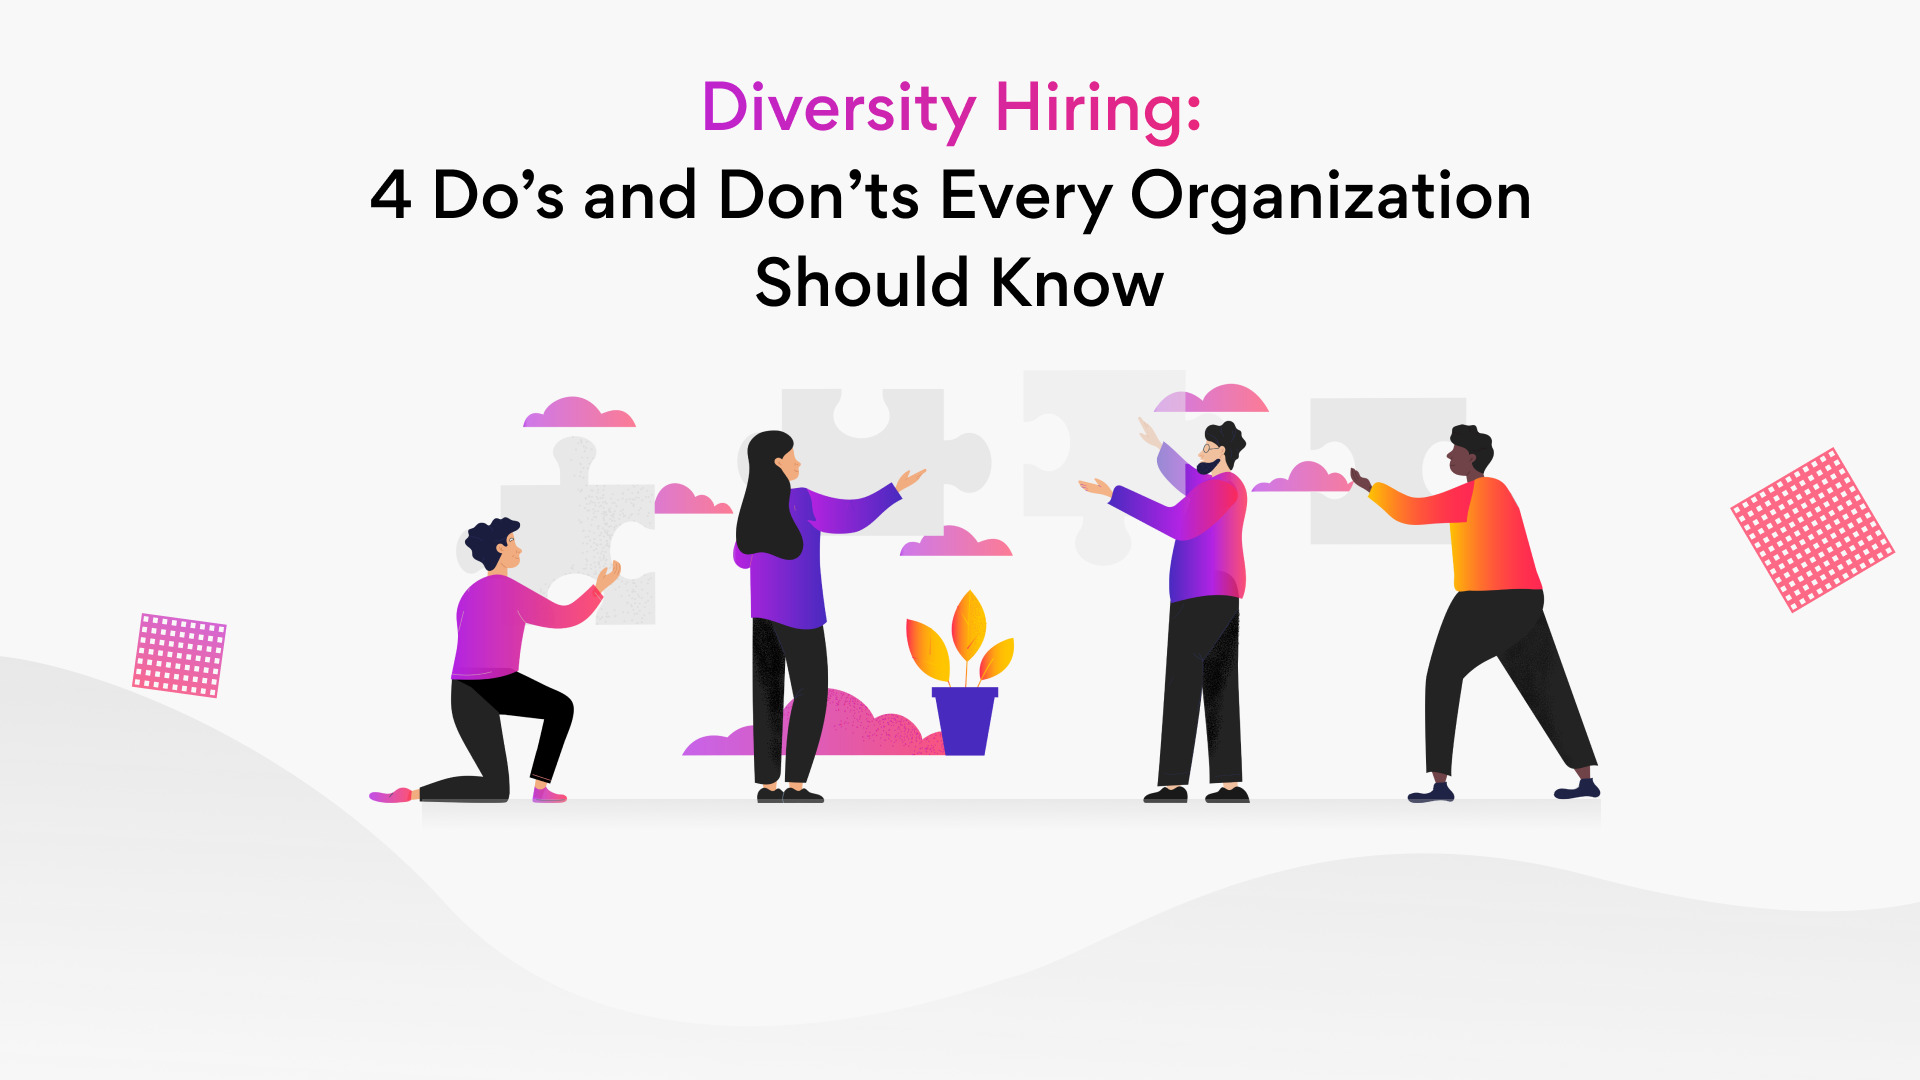 Diversity Hiring: 4 Do's & Don'ts Hiring Managers Must Know